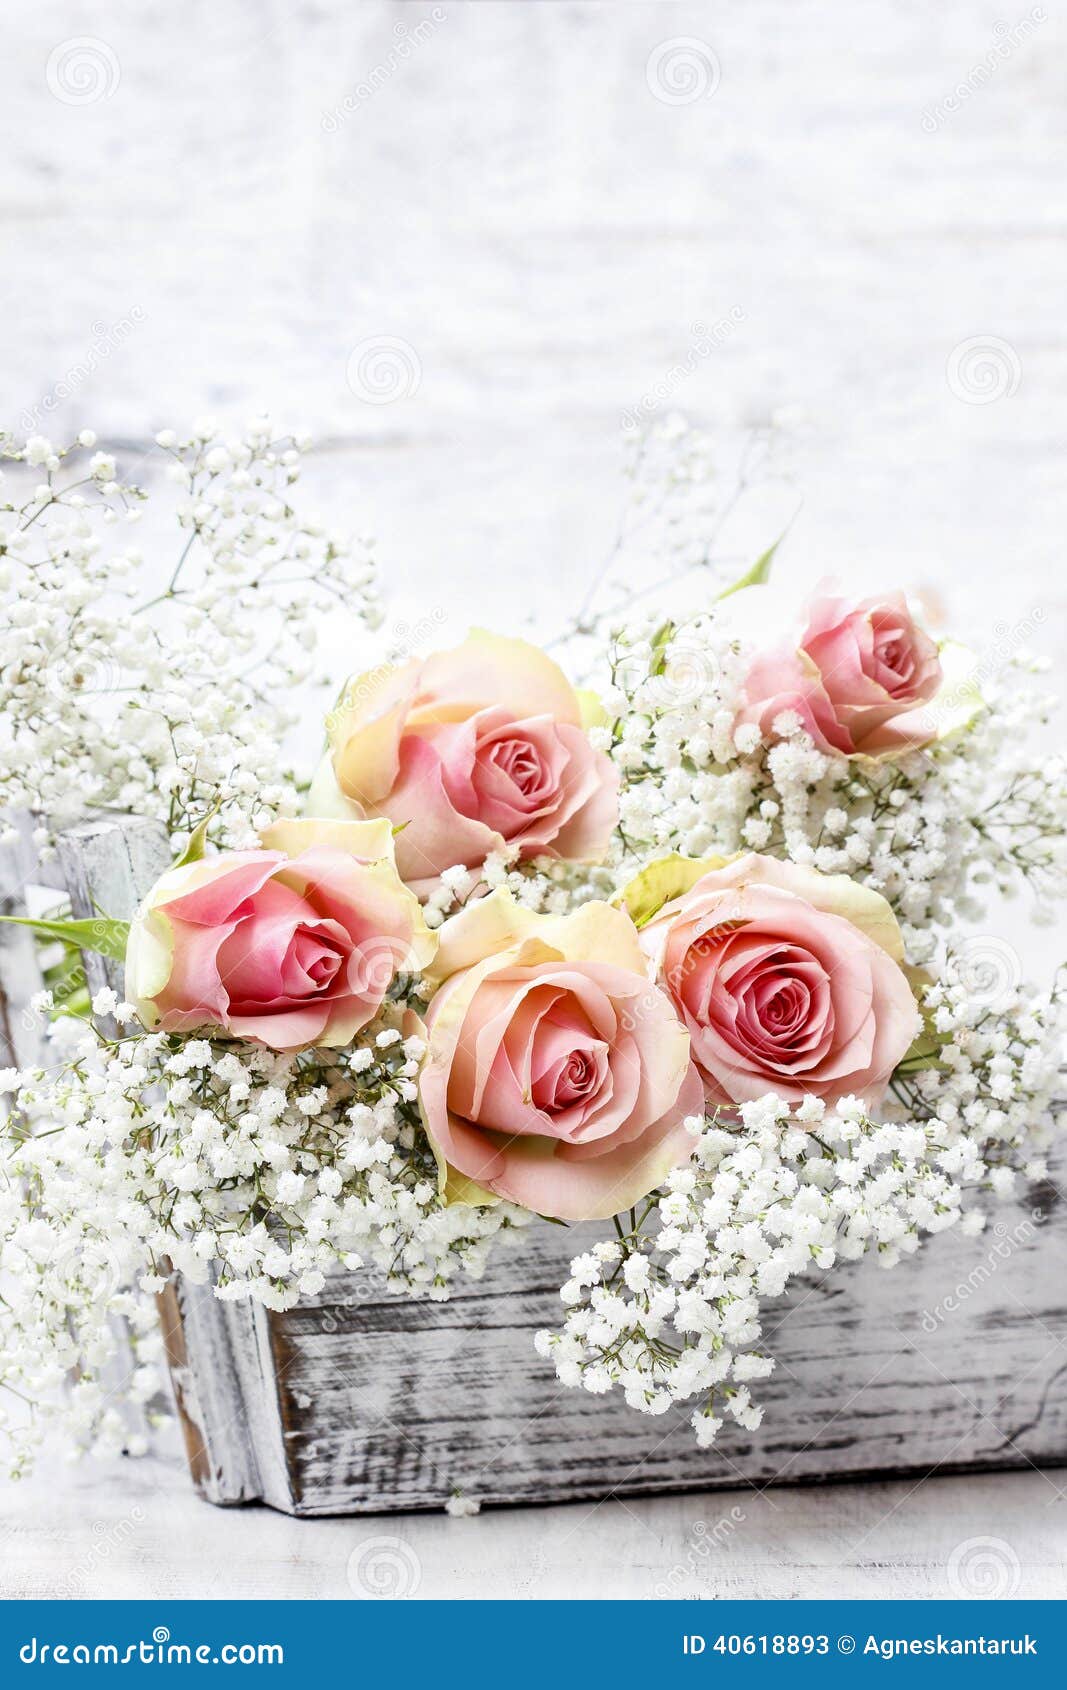 Beautiful Pink Roses And Gypsophila (Baby's-breath Flowers 